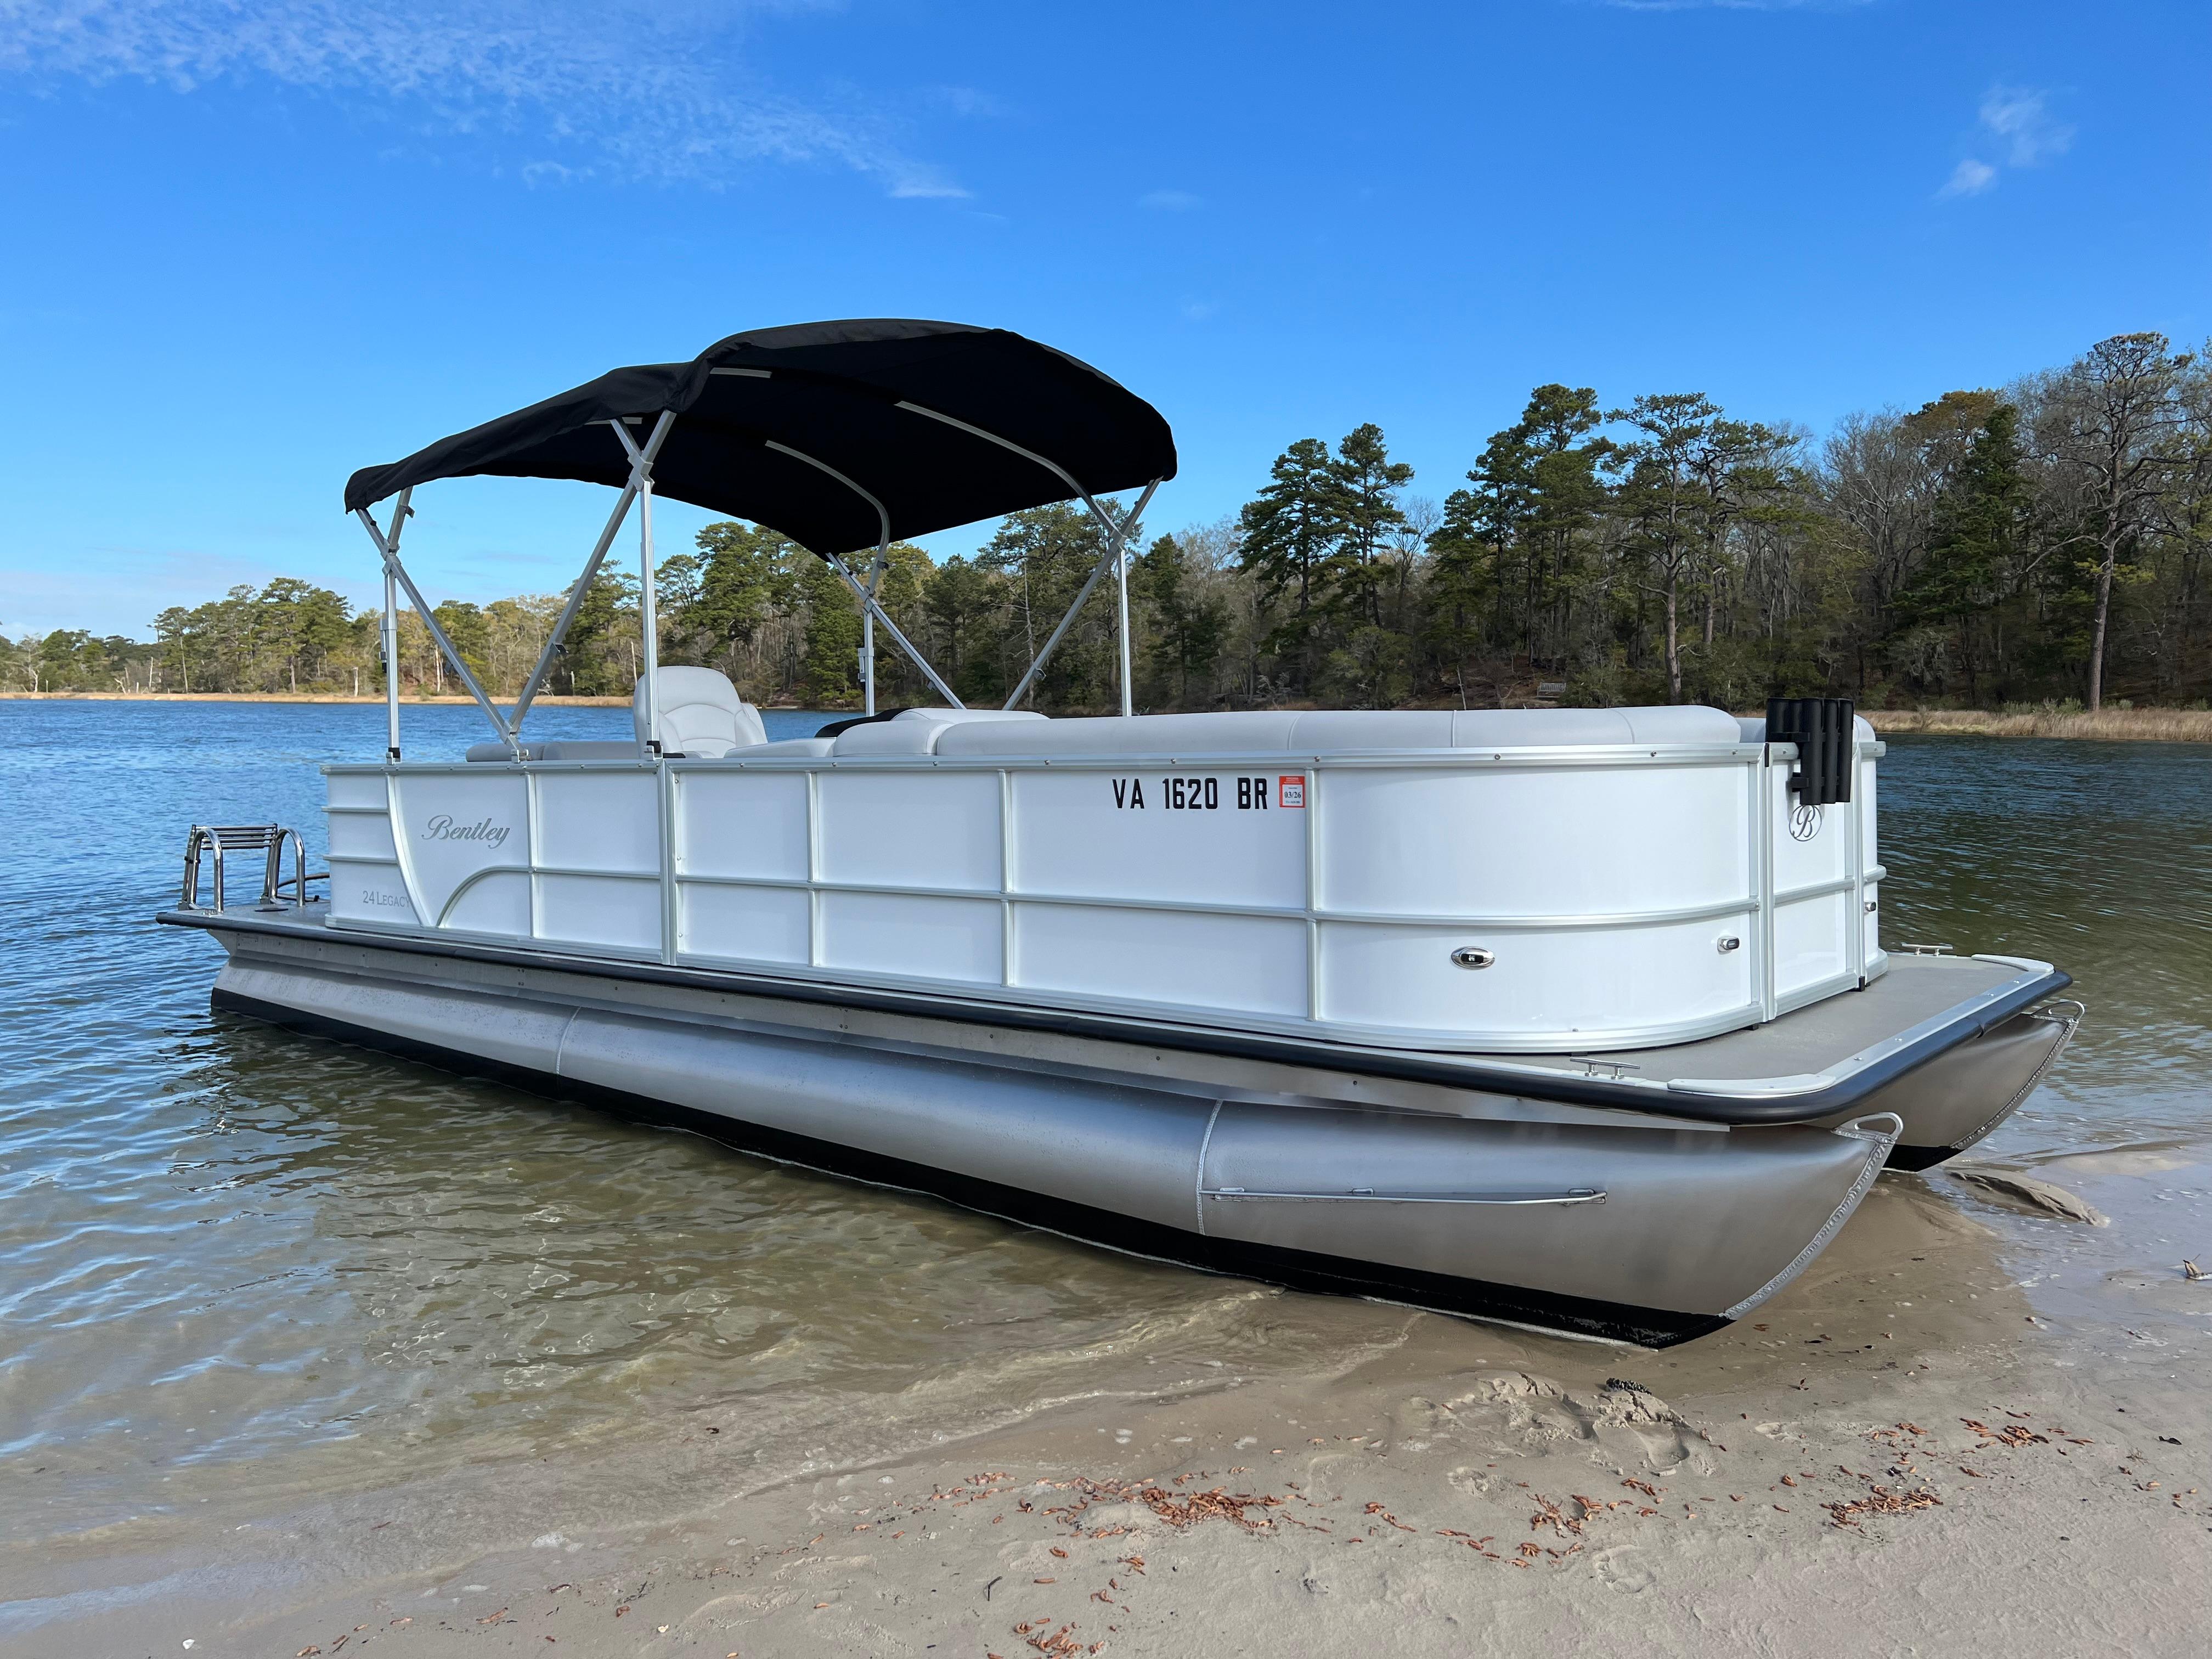 Pontoon boats for sale in Virginia Beach - Boat Trader